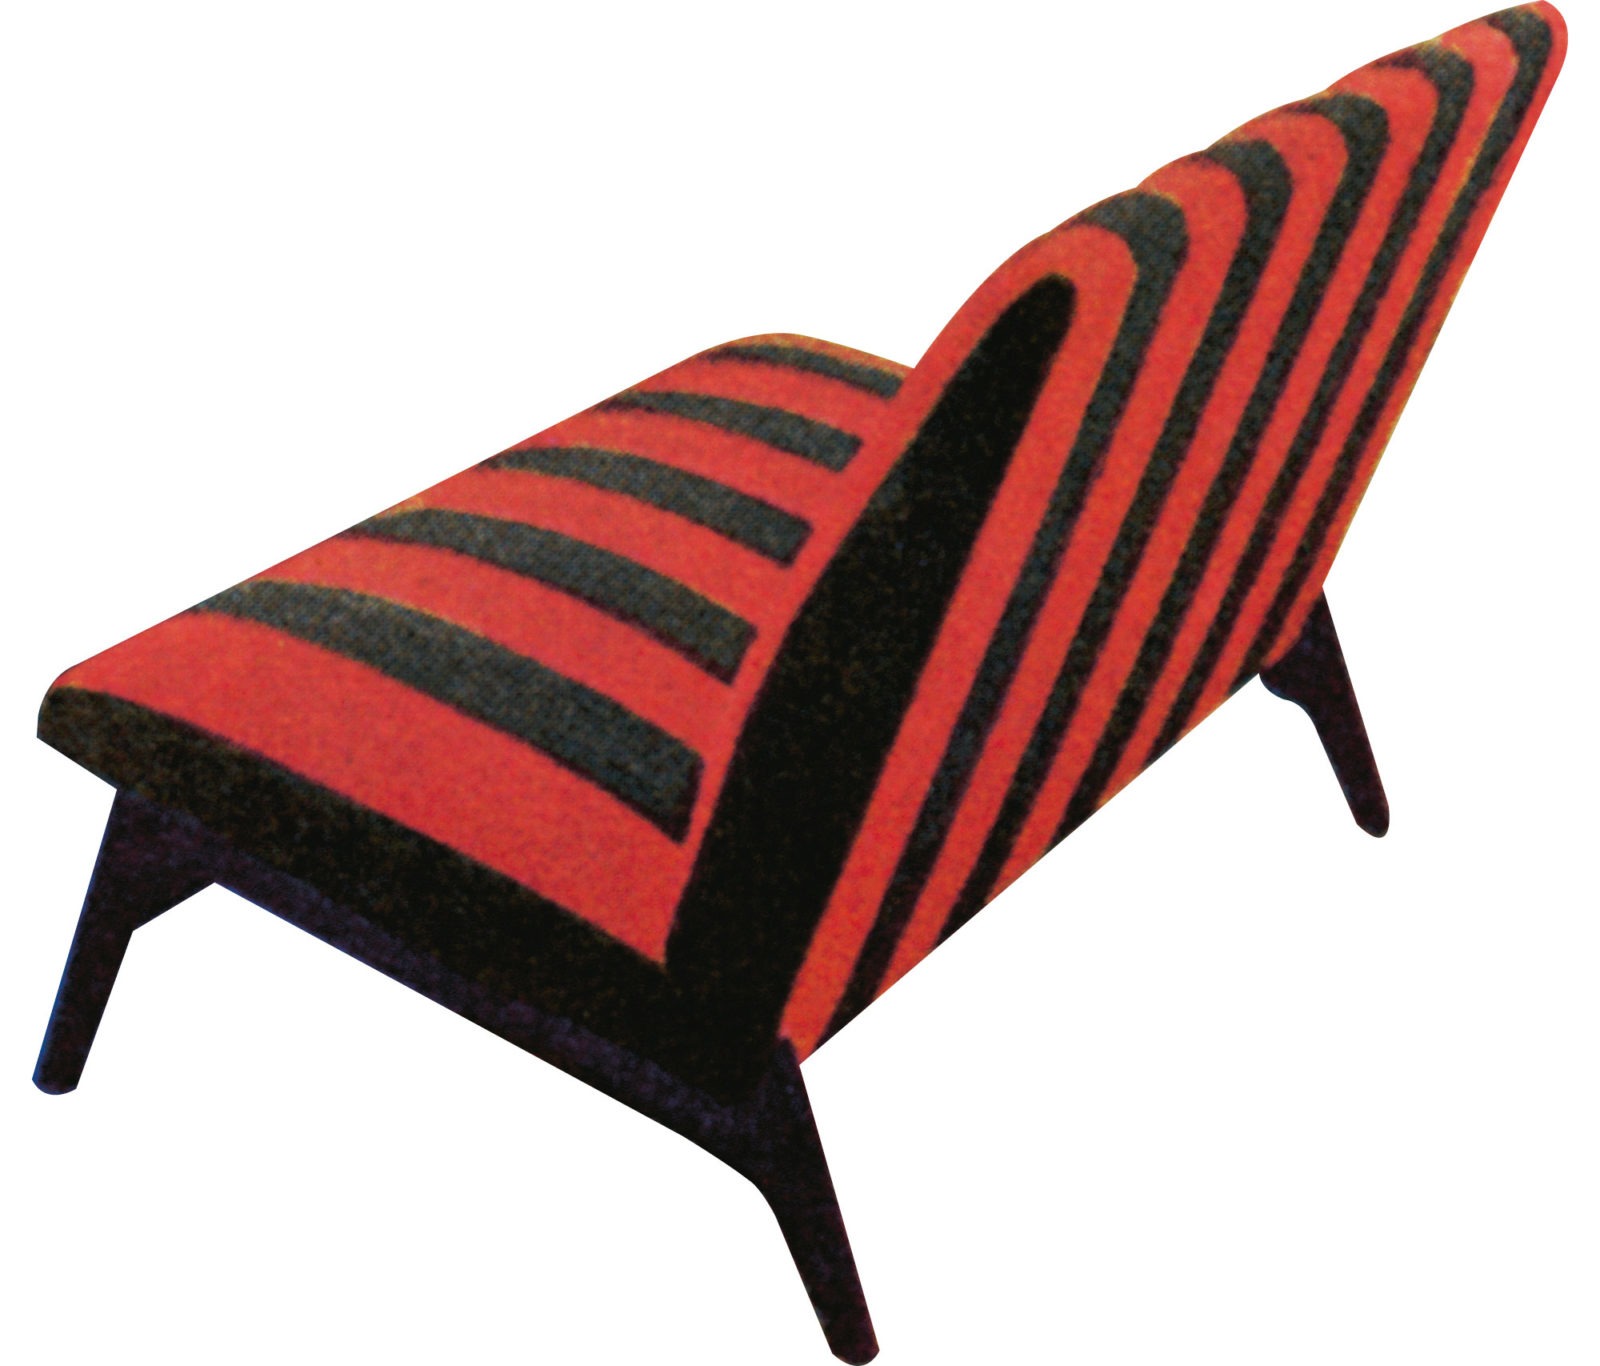 Small sofa with red-black striped fabric, IKEA PRAAG.